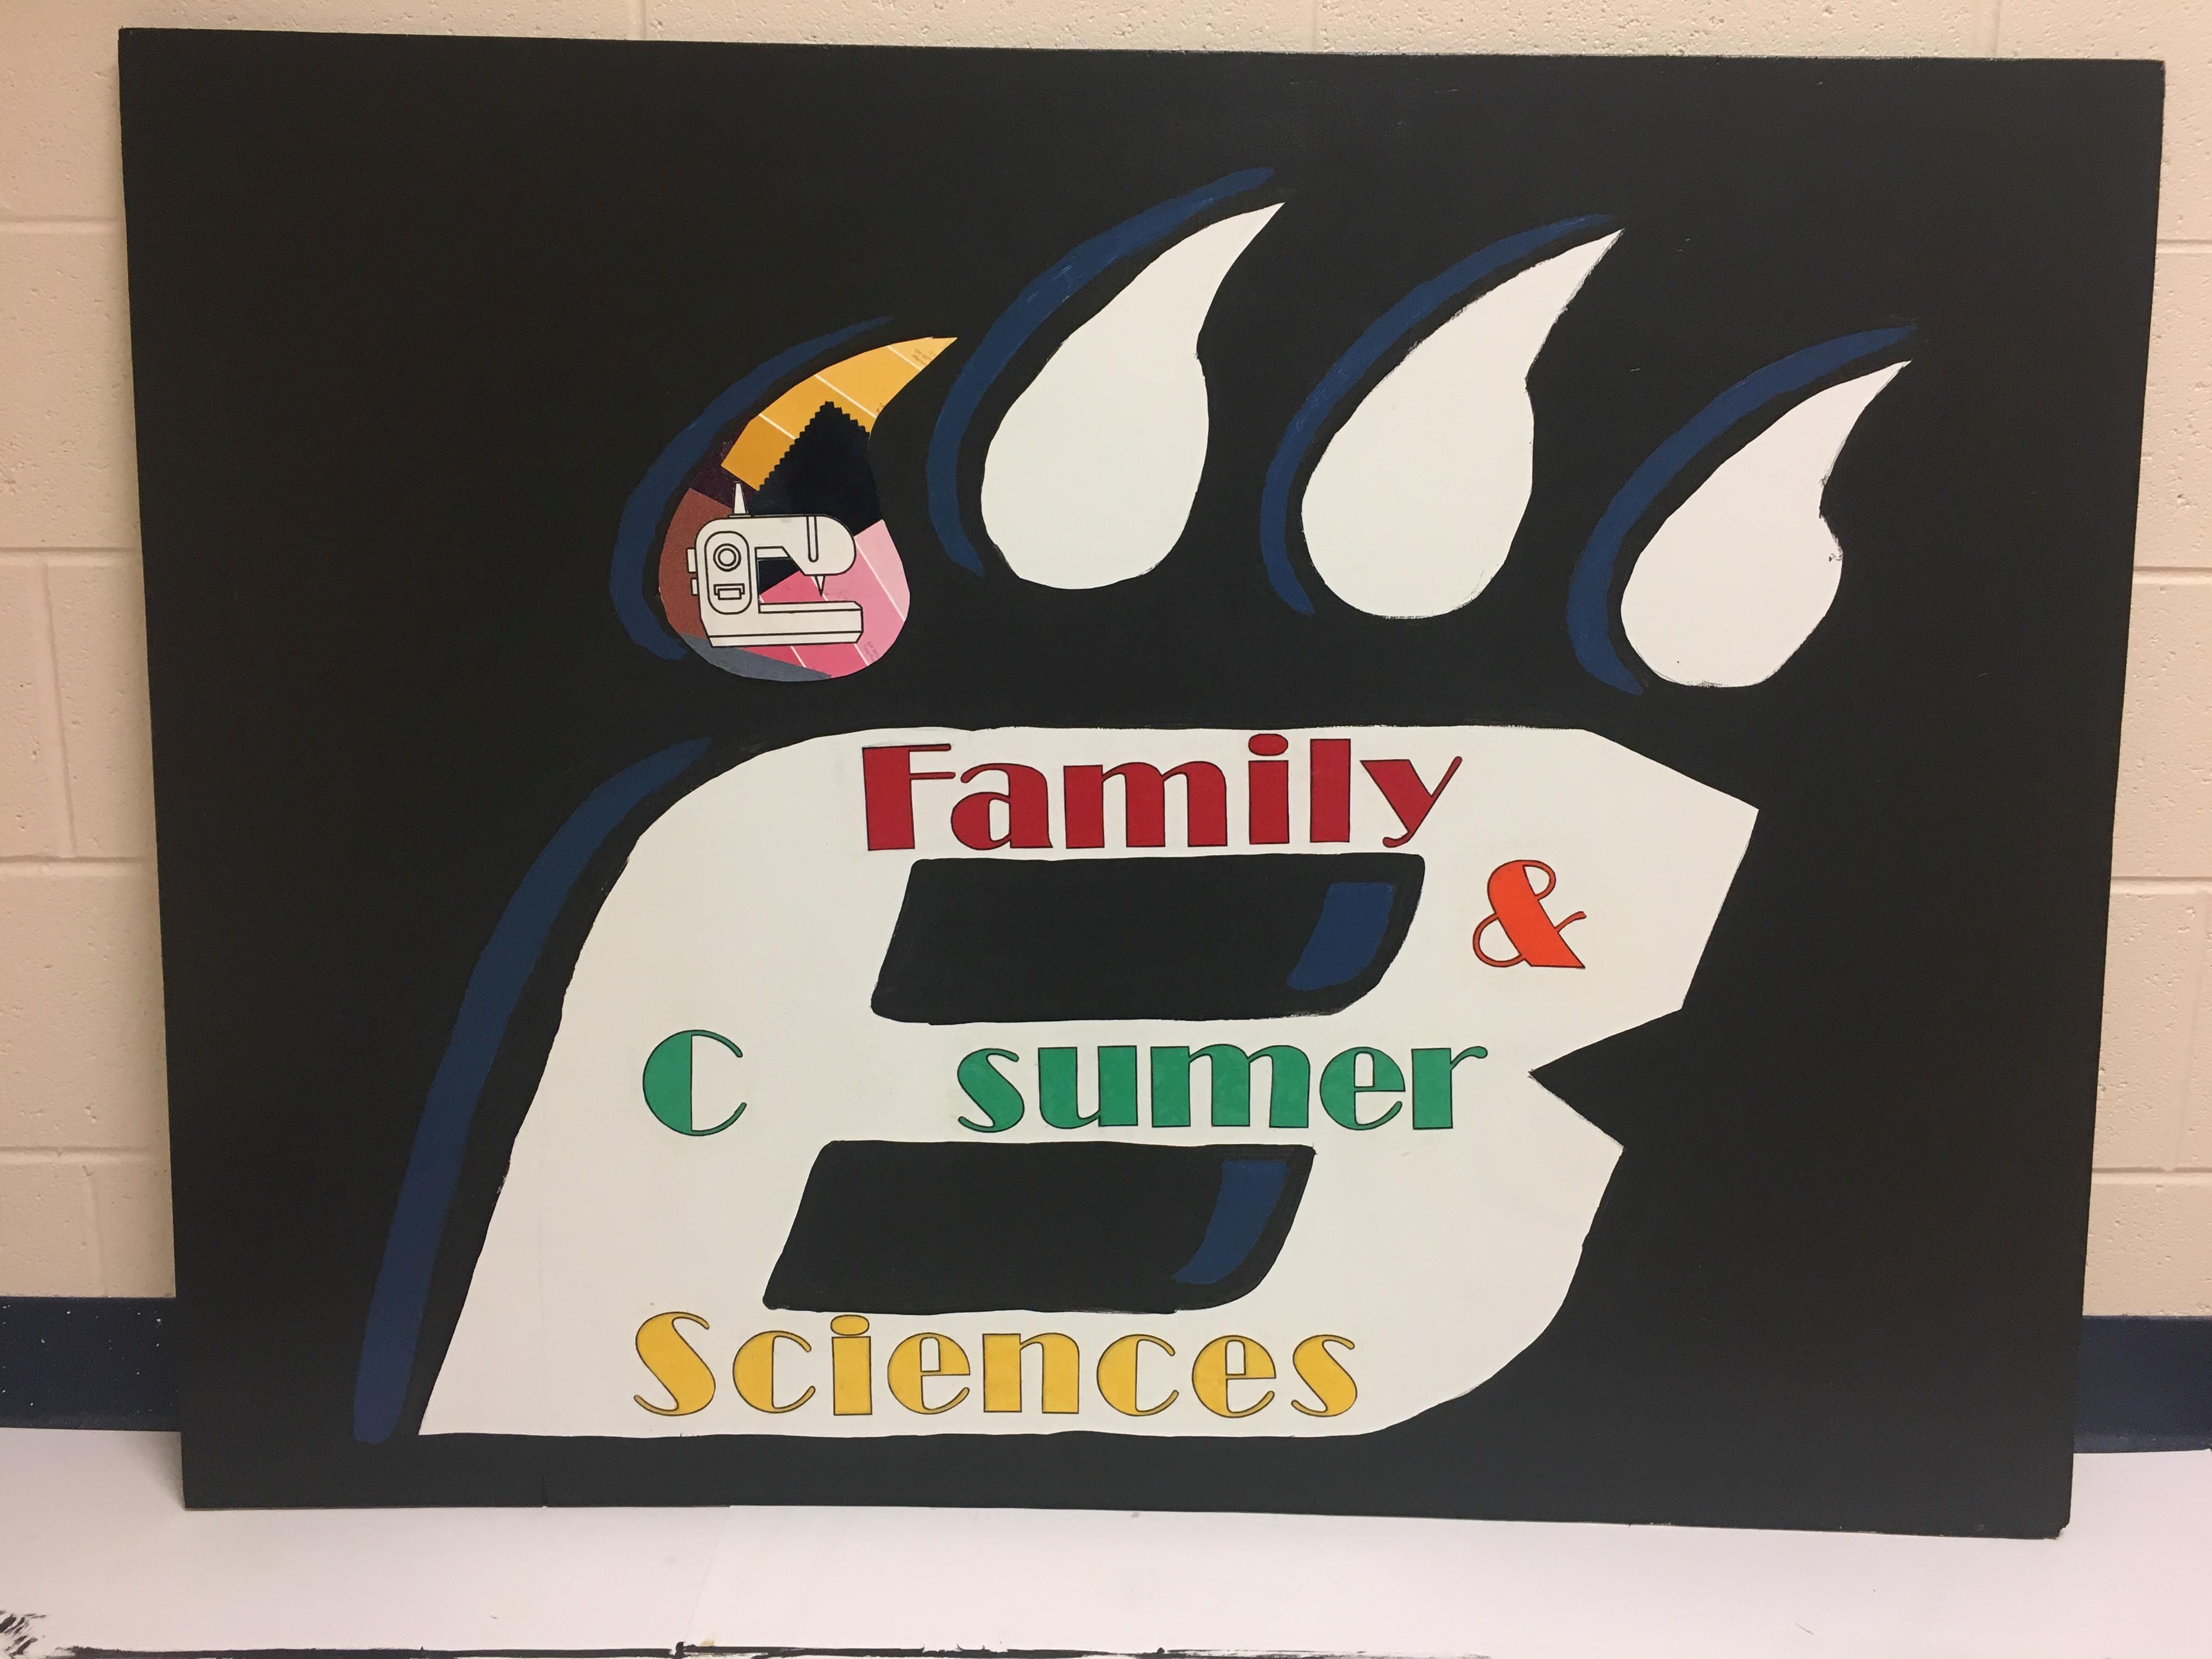 Family & Consumer Sciences--each claw will show a different aspect of FCS classes. The first is sewing. Finances, child rearing and cooking will be added in a similar collaged way.